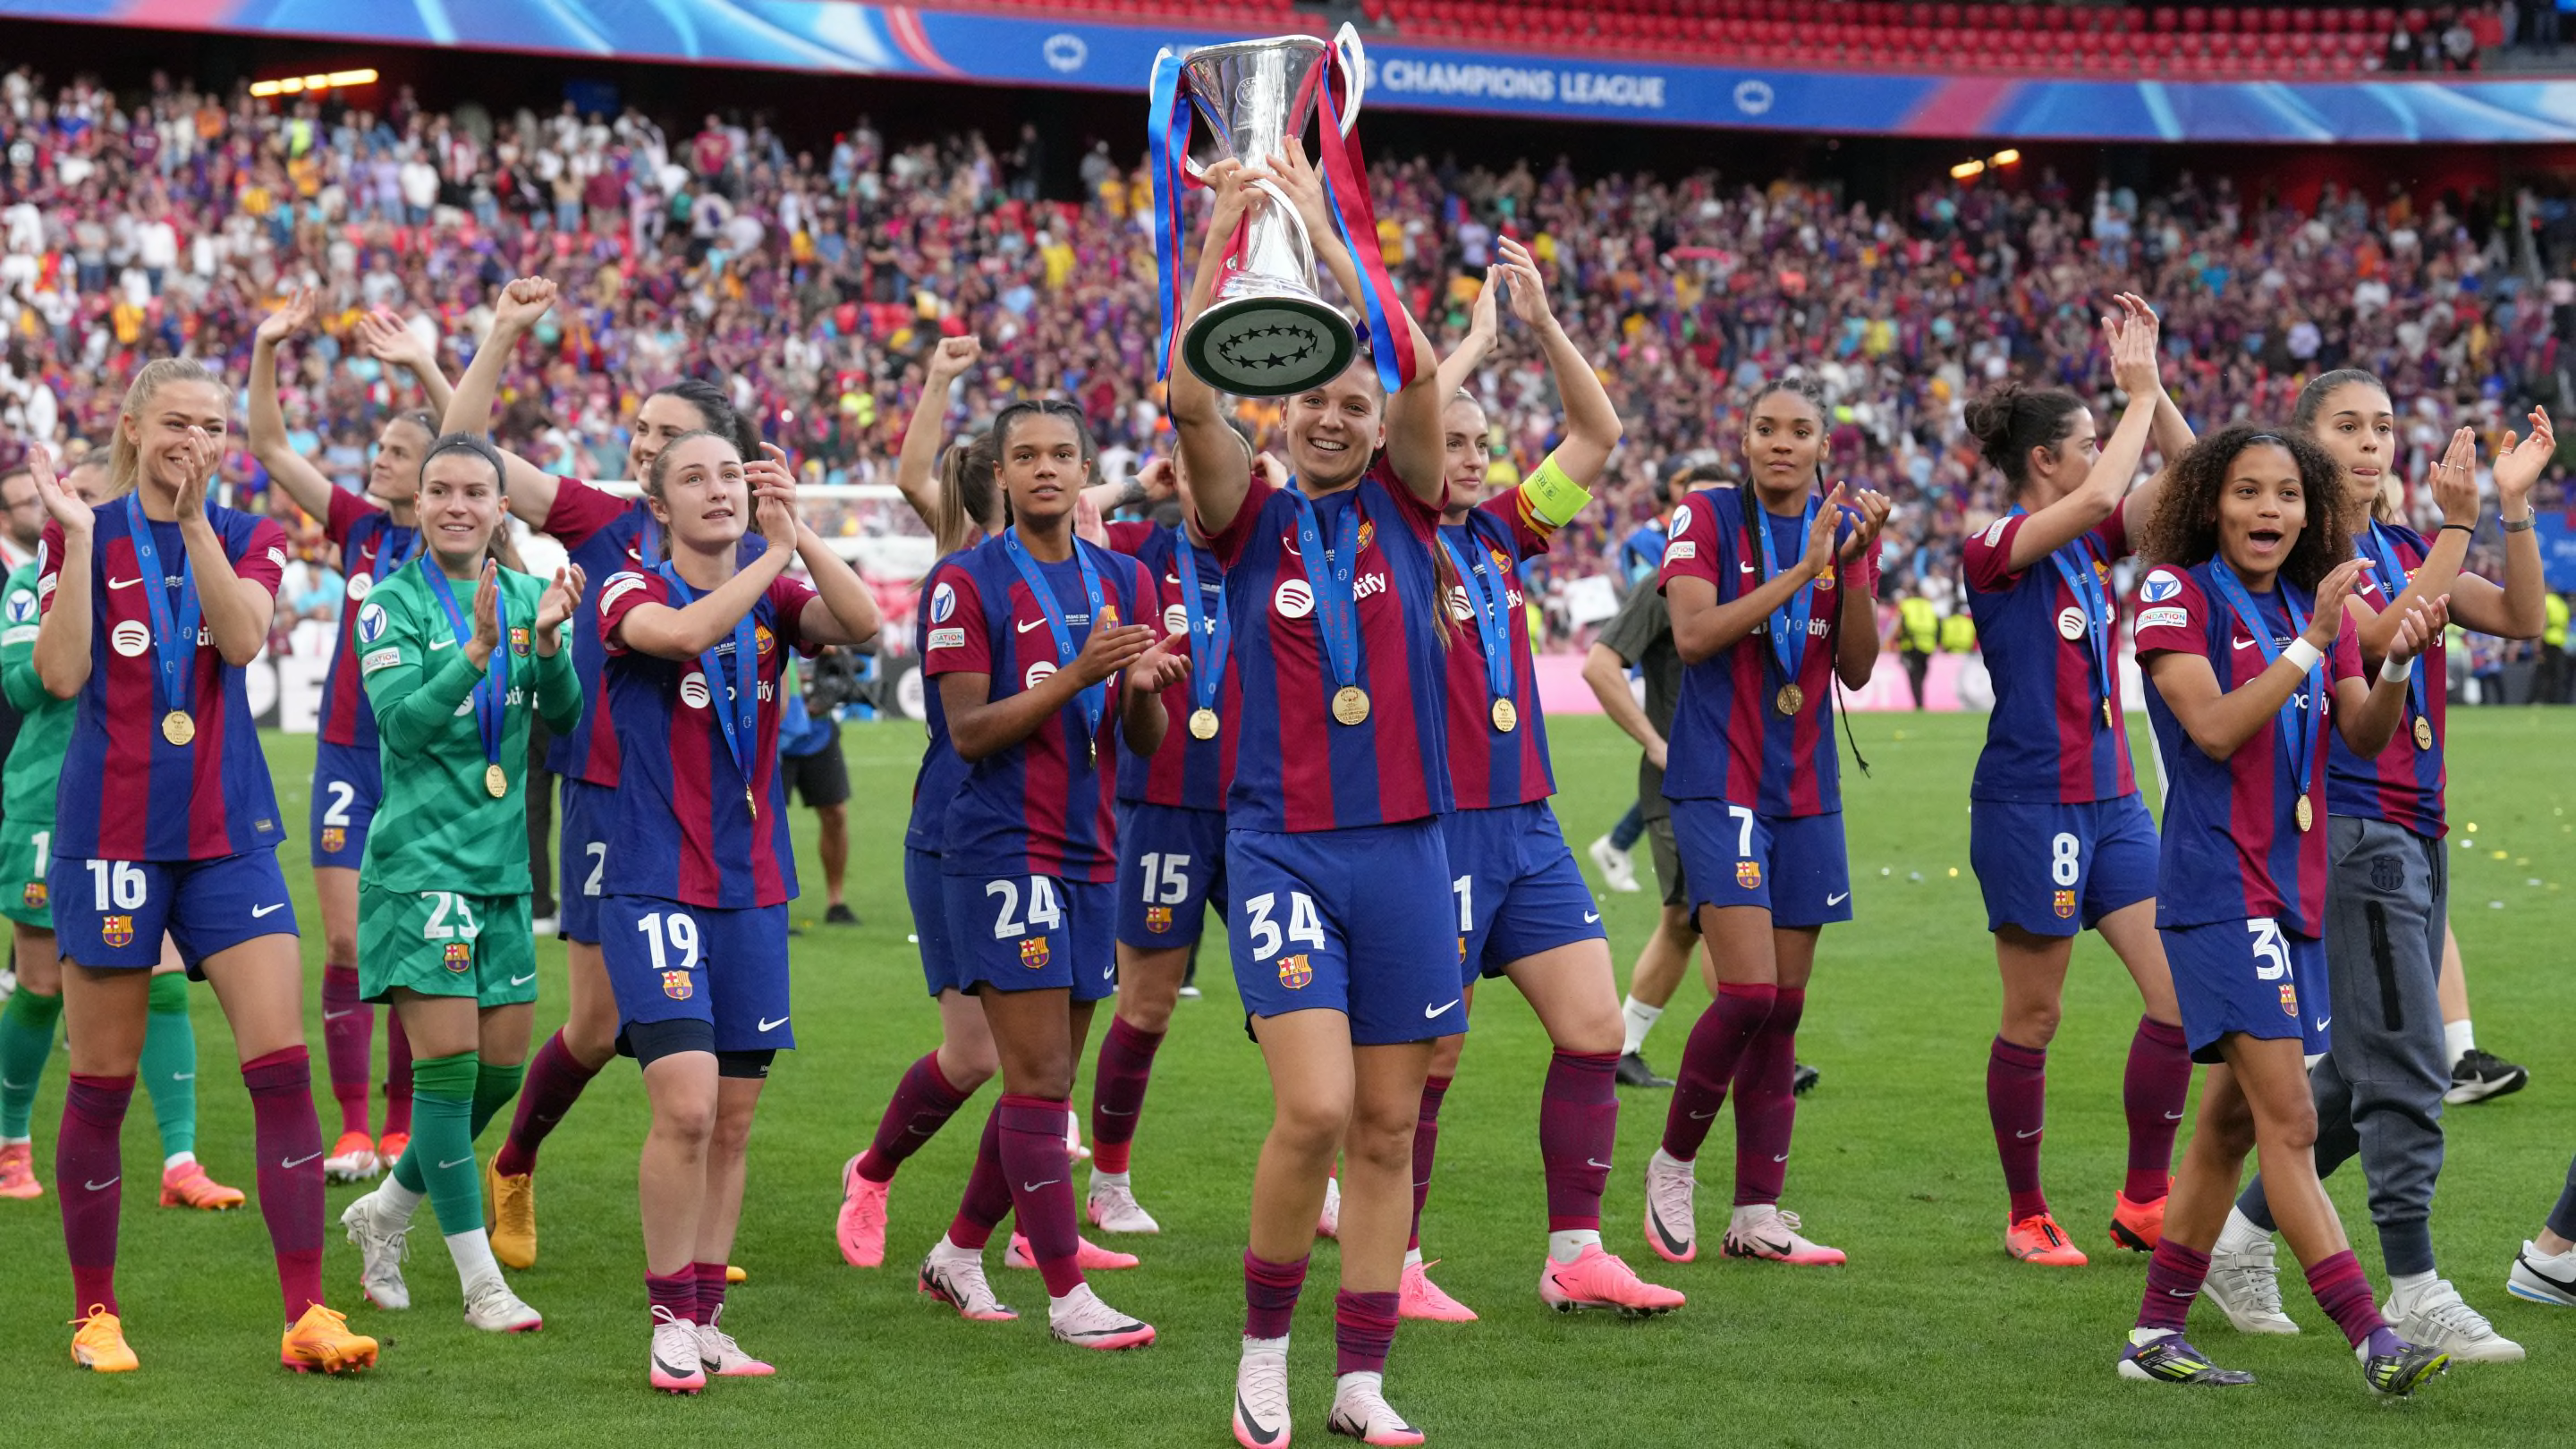 5 things we learned after Barcelona finally crack Lyon code to retain UWCL